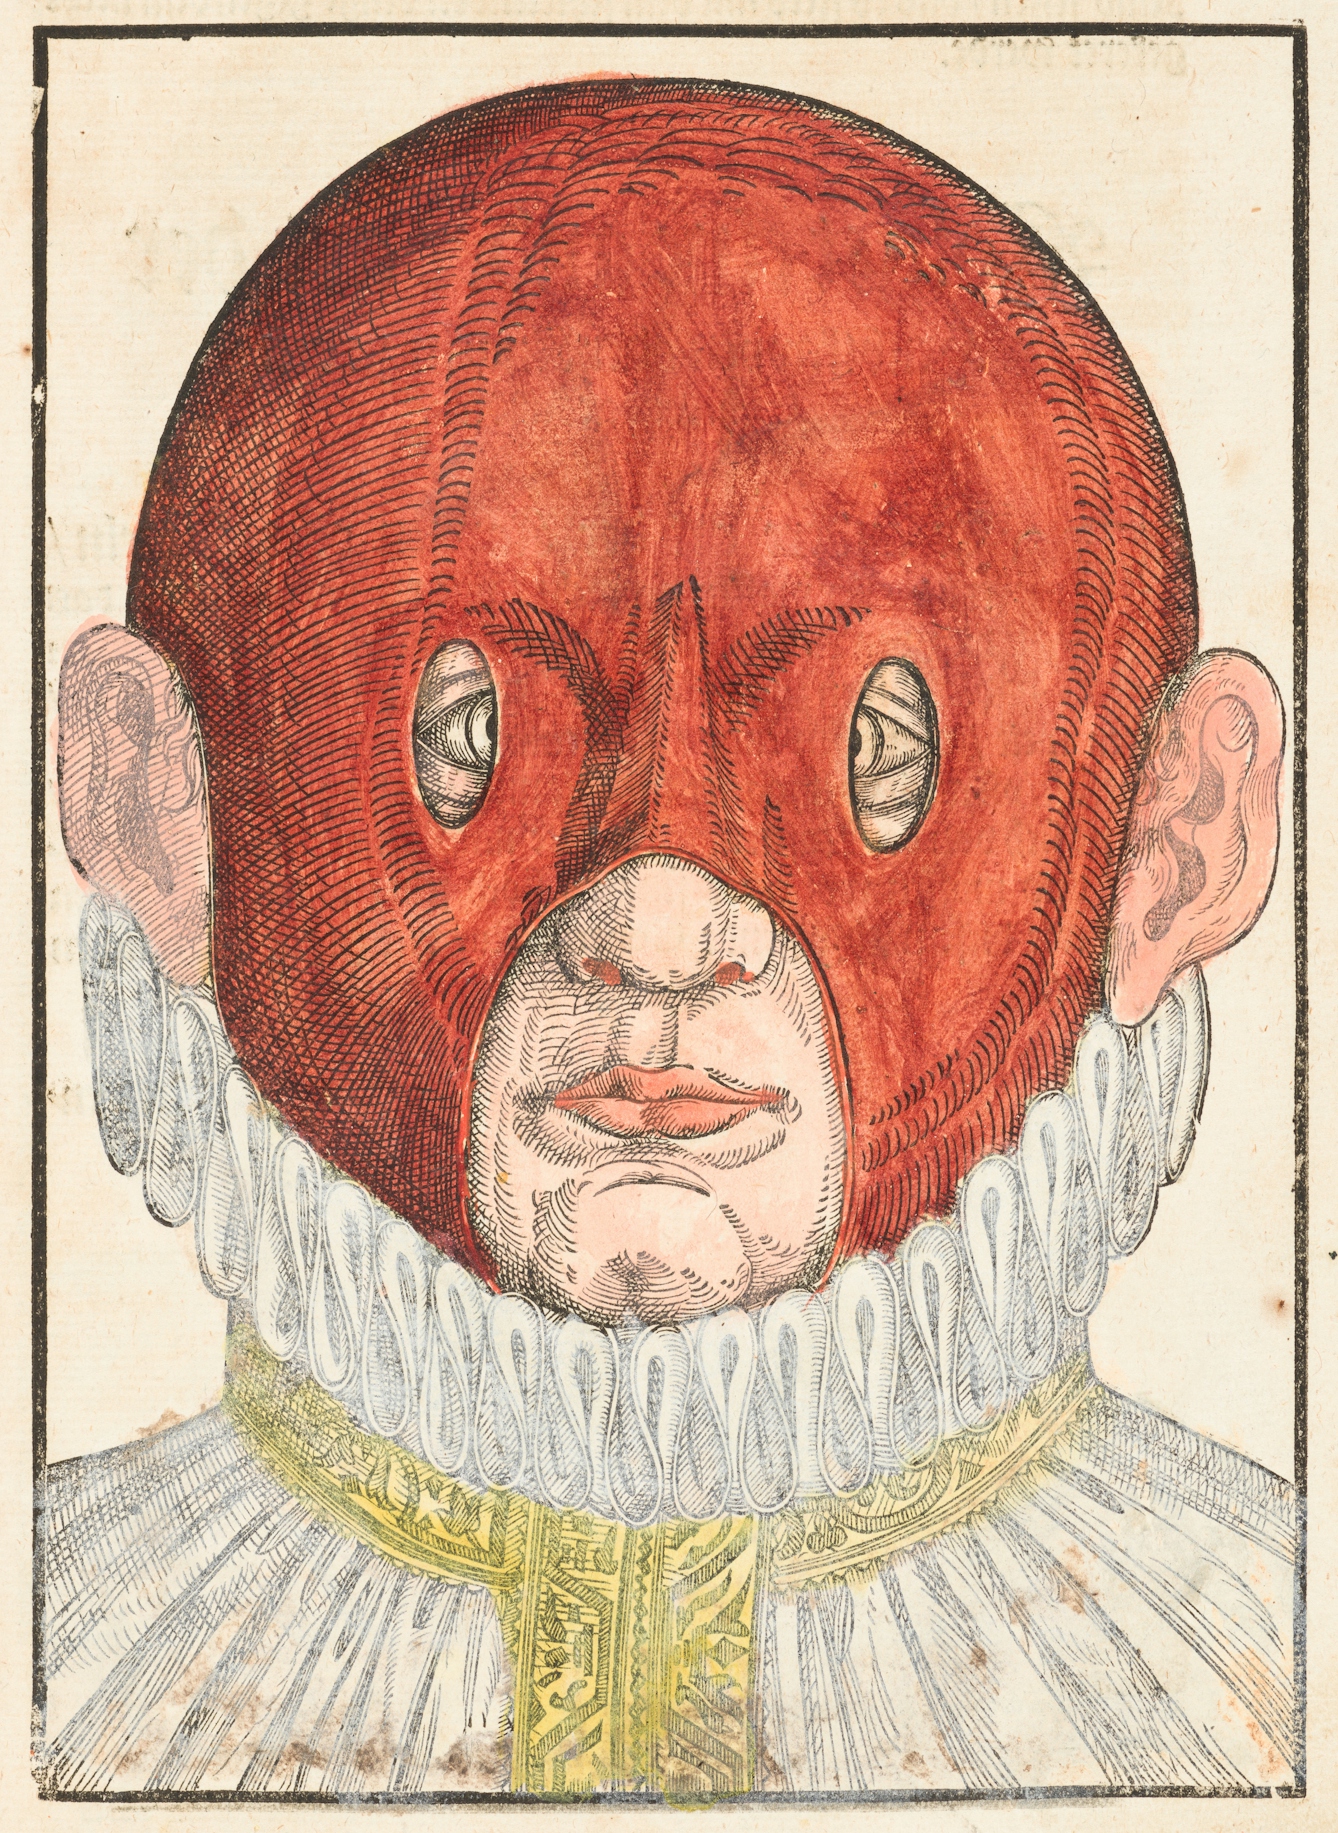 Coloured engraving from a 16th century book showing a person's head and neck ruff. On their head is a red mask which has small holes exposing the outside edges of their eyes and larger holes exposing their ears, nose and mouth.